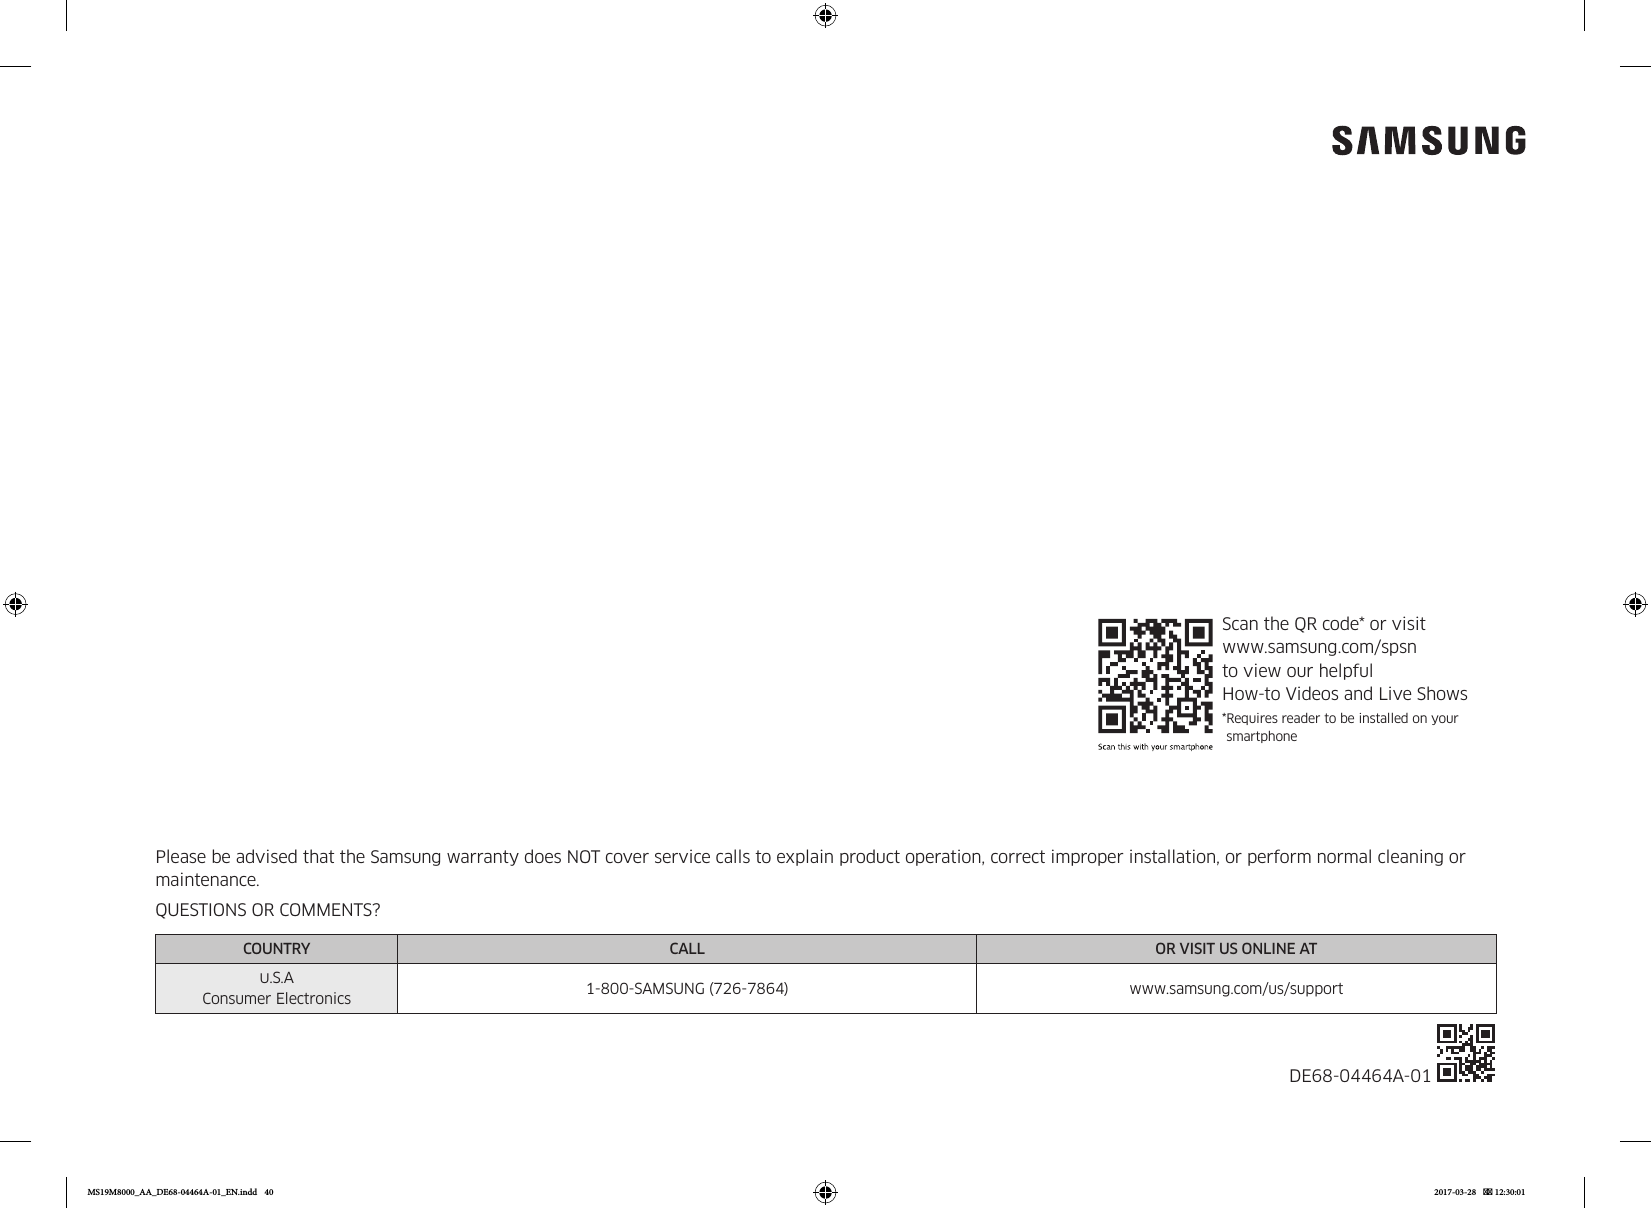 Please be advised that the Samsung warranty does NOT cover service calls to explain product operation, correct improper installation, or perform normal cleaning or maintenance.QUESTIONS OR COMMENTS?COUNTRY CALL OR VISIT US ONLINE AT.S.A Consumer Electronics 1-800-SAMSUNG (726-7864) www.samsung.com/us/supportDE68-04464A-01 Scan the QR code* or visit  www.samsung.com/spsn  to view our helpful  How-to Videos and Live Shows* Requires reader to be installed on your smartphoneMS19M8000_AA_DE68-04464A-01_EN.indd   40 2017-03-28    12:30:01